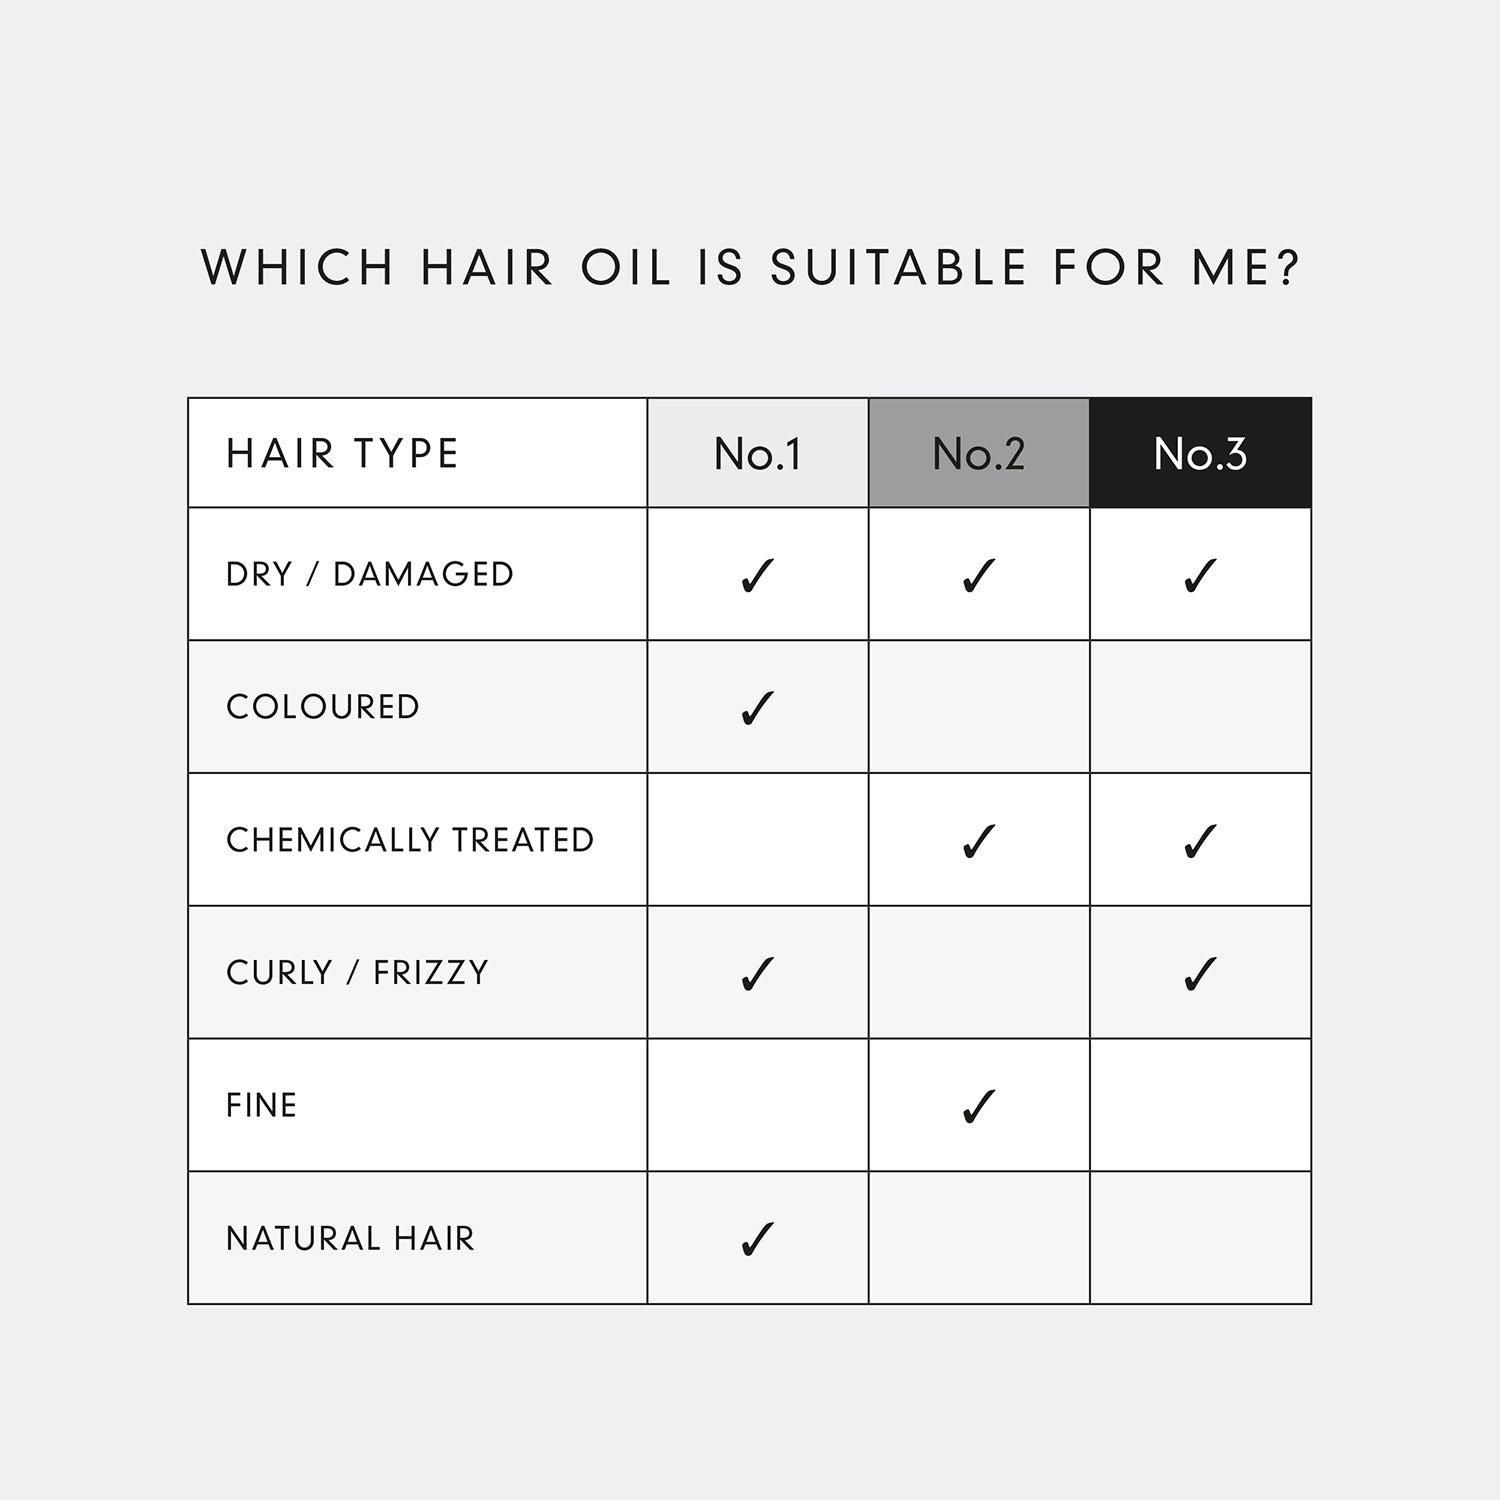 No.2 – Conditioning Hair Oil